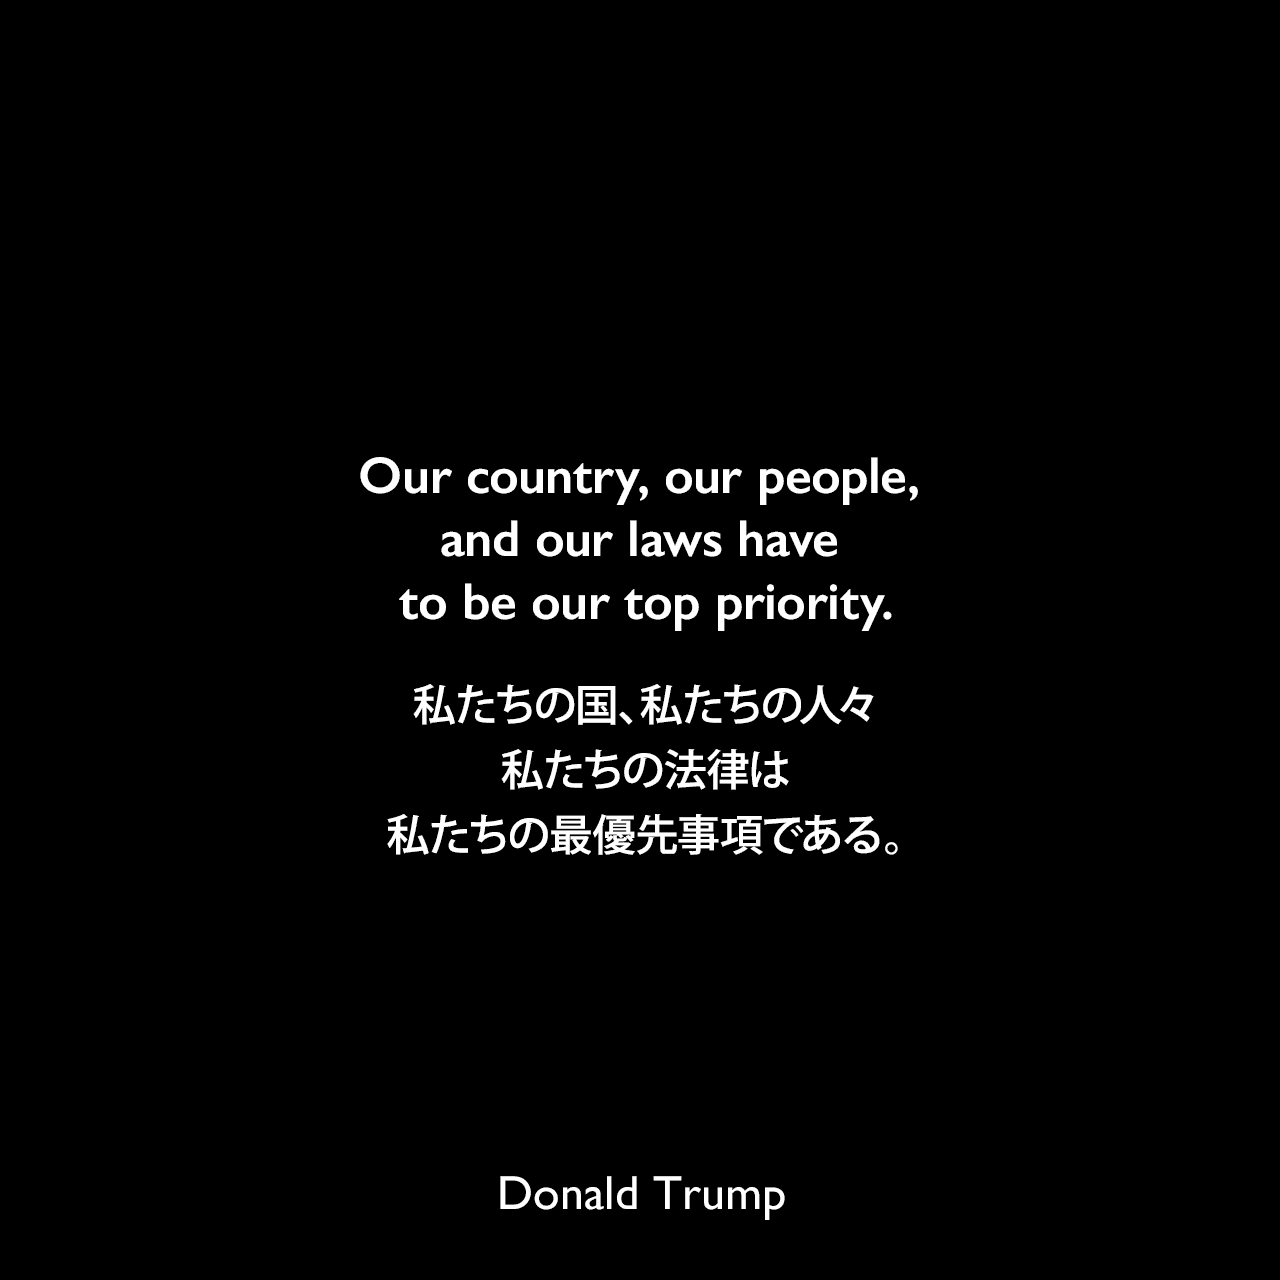 Our country, our people, and our laws have to be our top priority.私たちの国、私たちの人々、私たちの法律は、私たちの最優先事項である。- ドナルド・トランプによる本「THE TRUMP: 傷ついたアメリカ、最強の切り札」よりDonald Trump